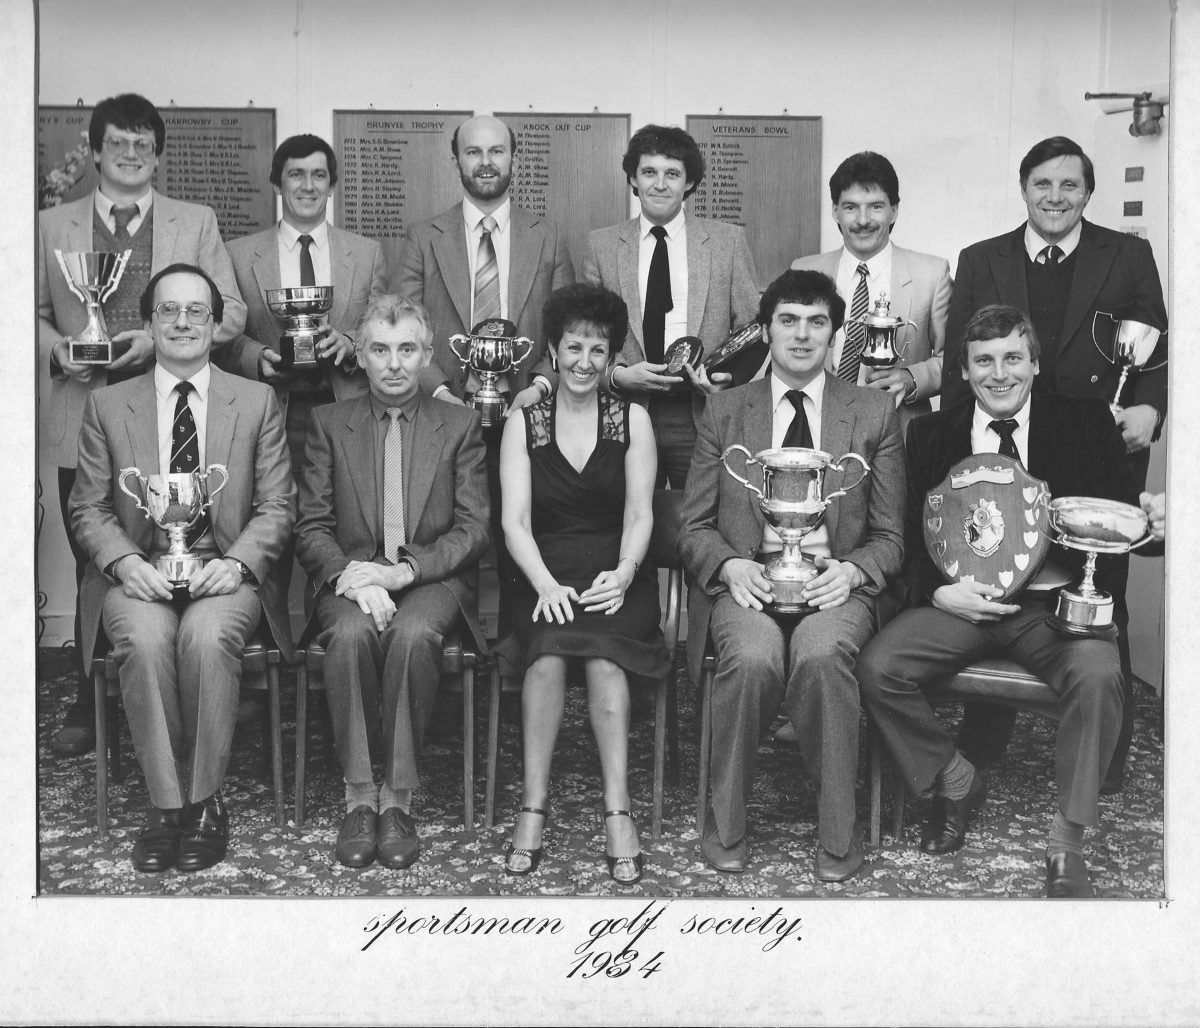 Who do you know in this pub team from the Sportsman?